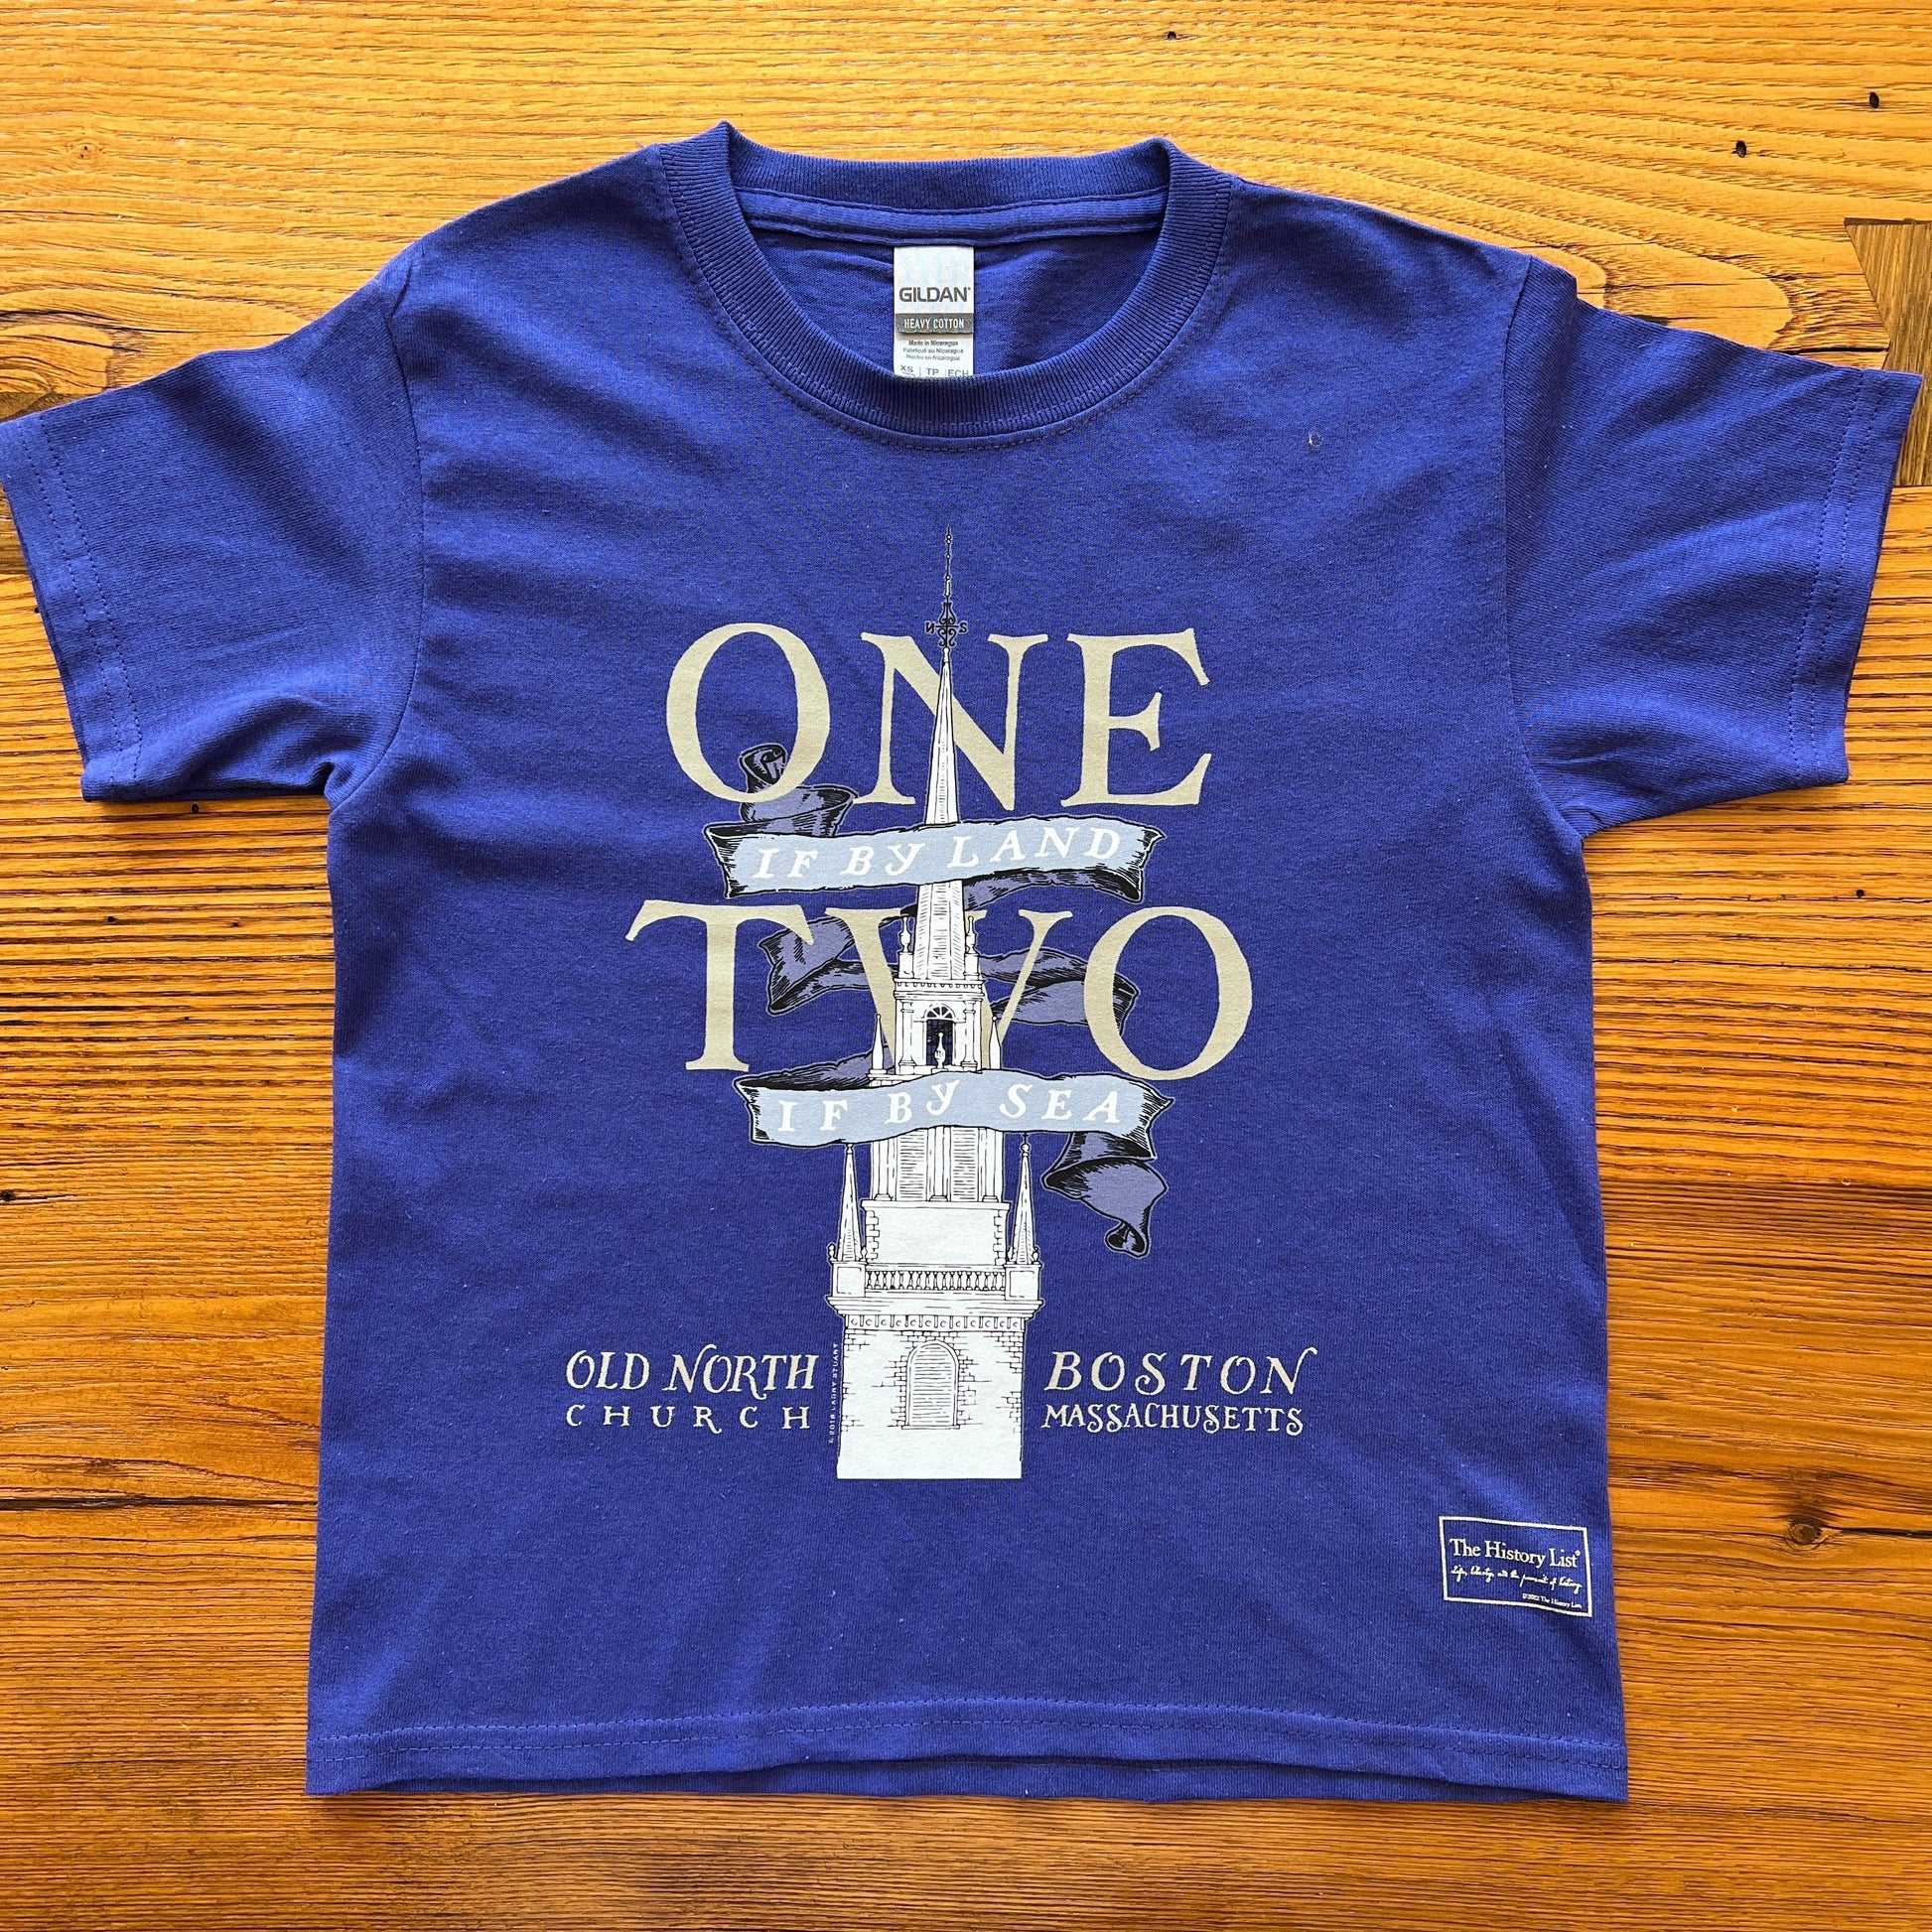 History midnight by The One in Revere ride celebrating shirt – the land\